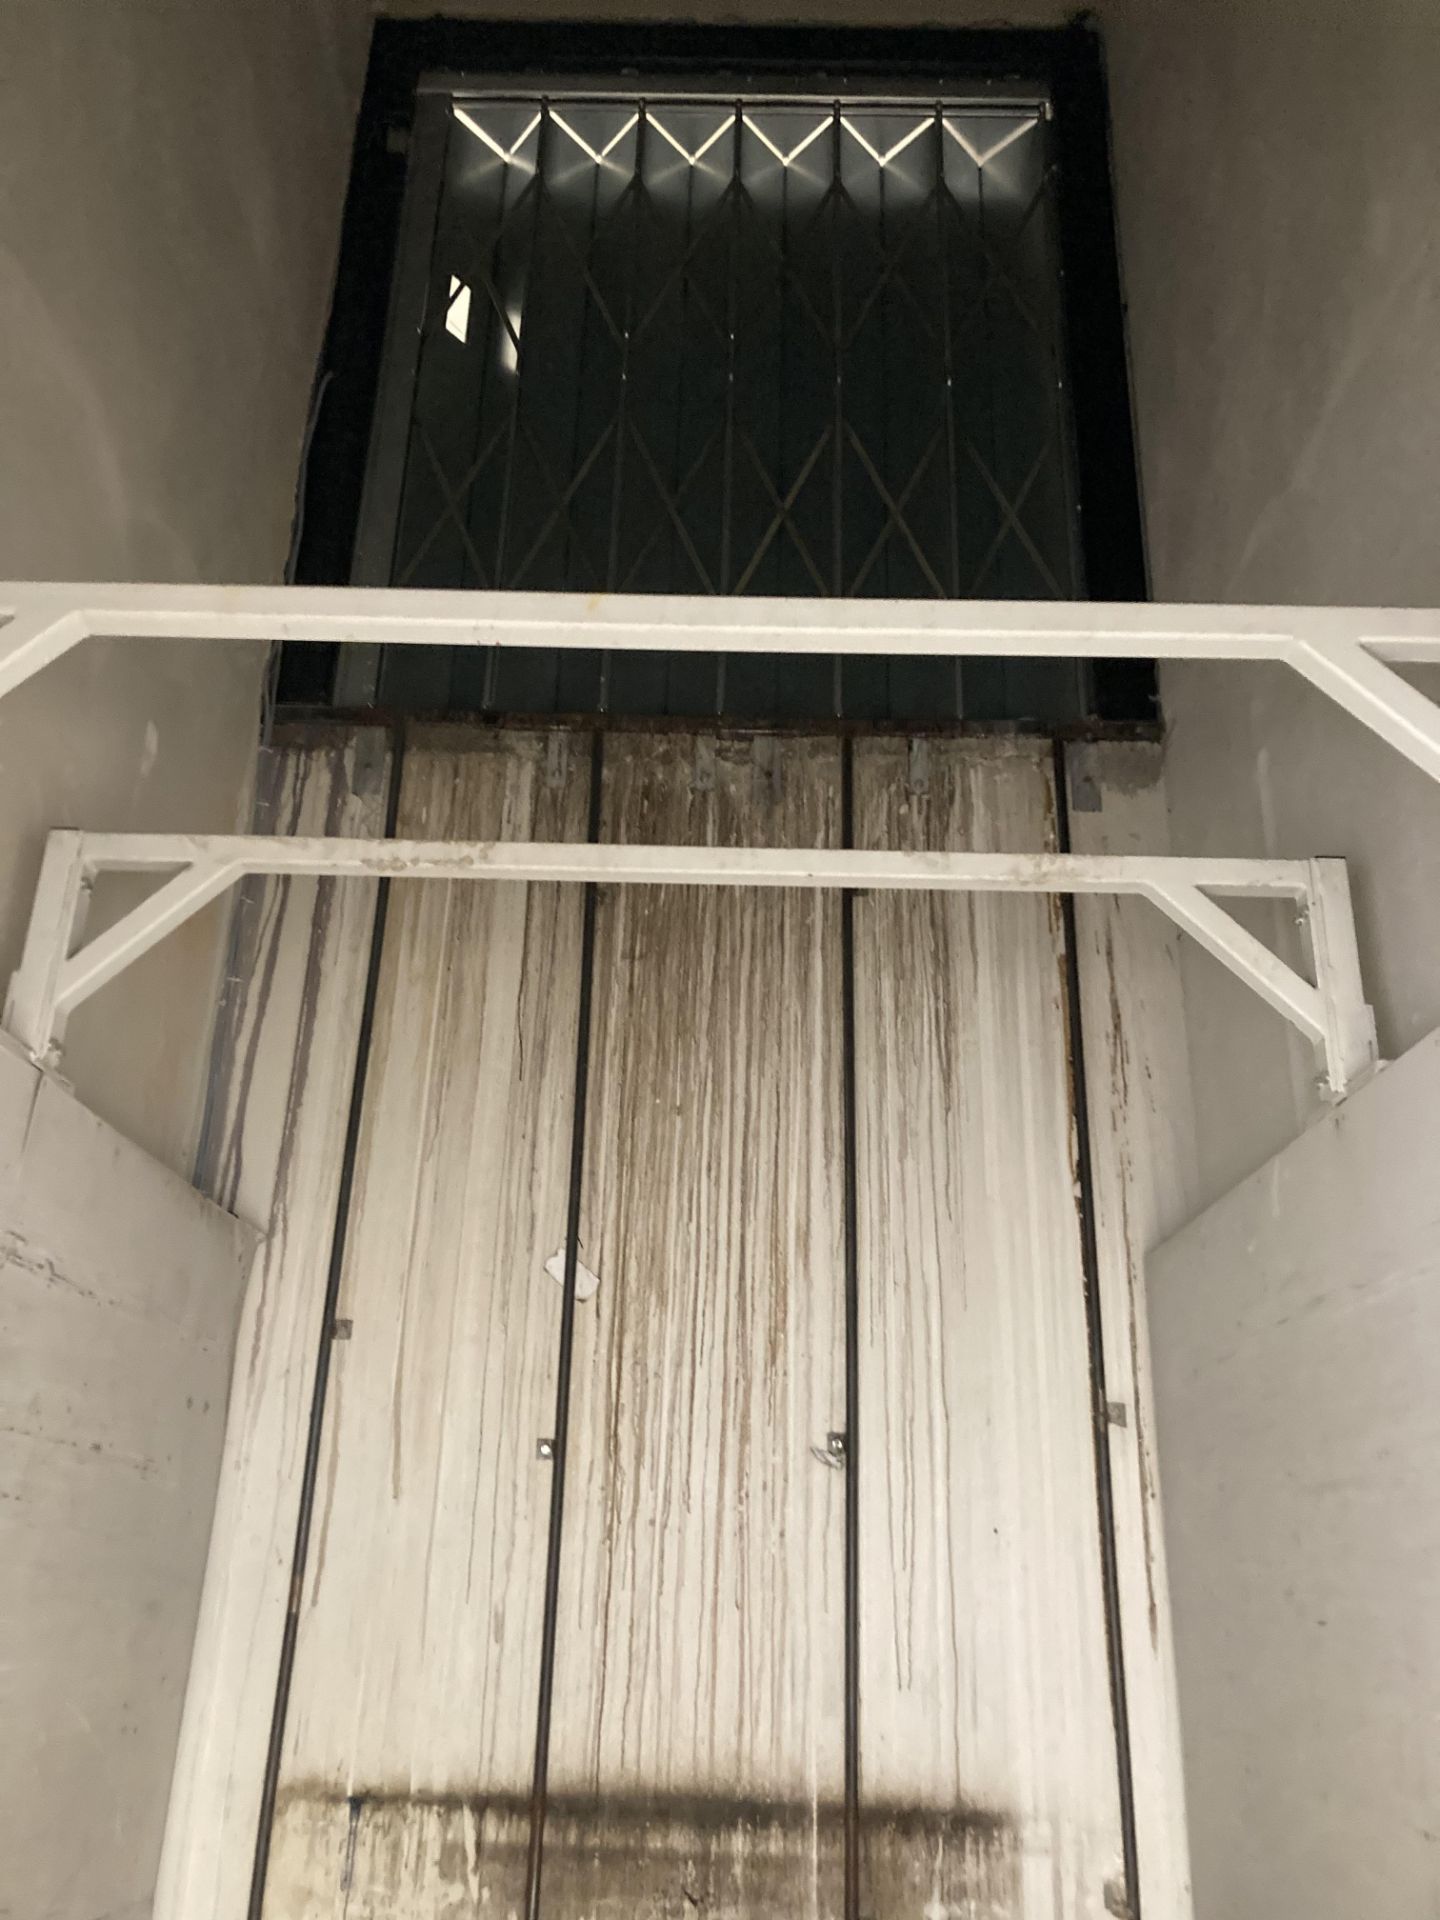 Nutzlast Open Ended Flow Through Goods Lift - Image 5 of 6